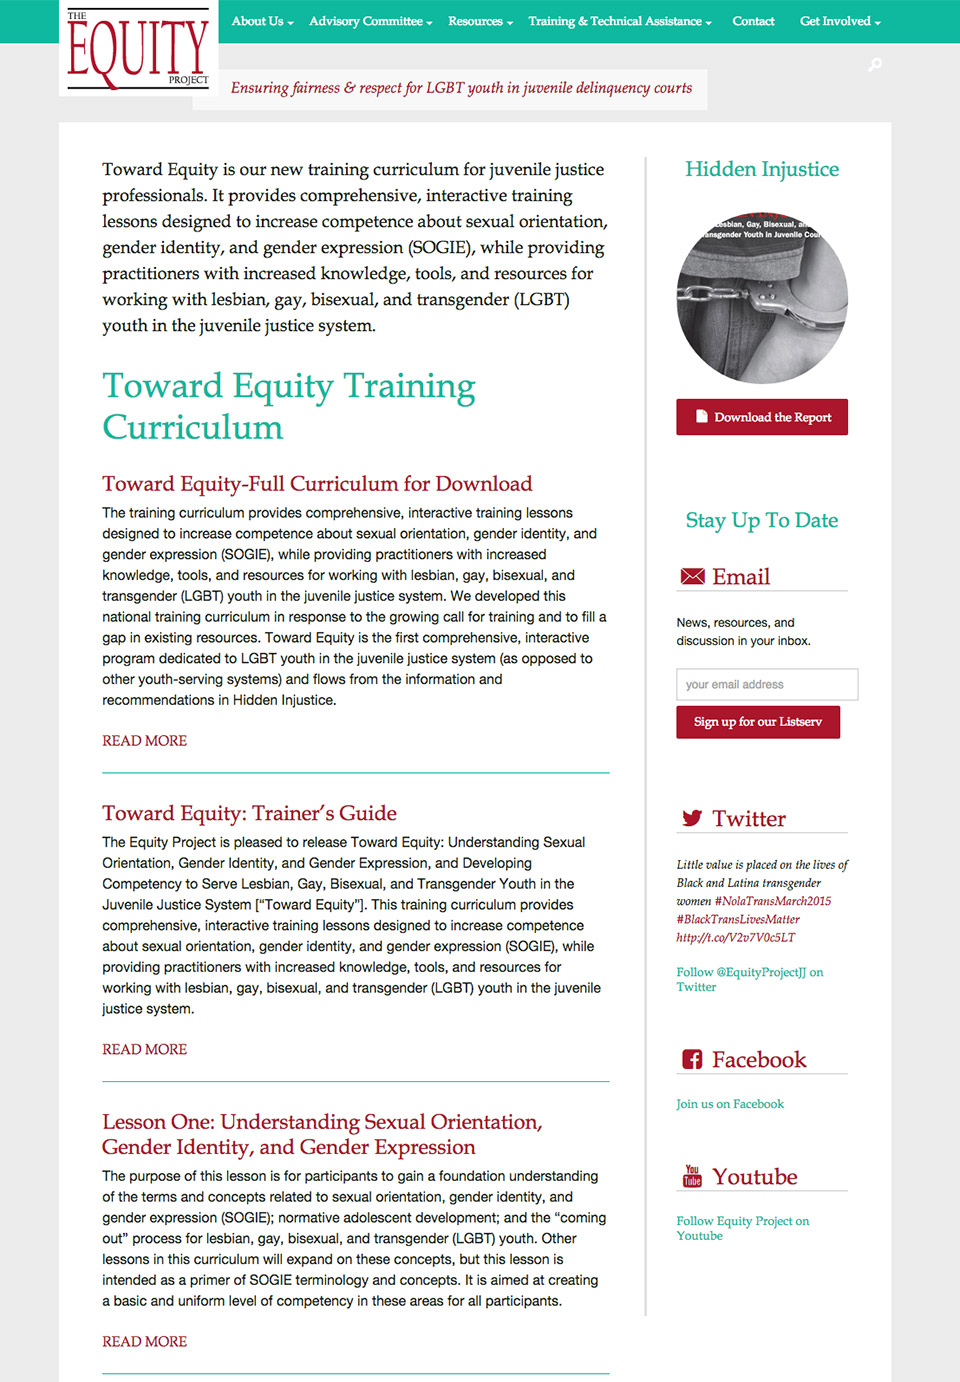 The Equity Project: Training Materials